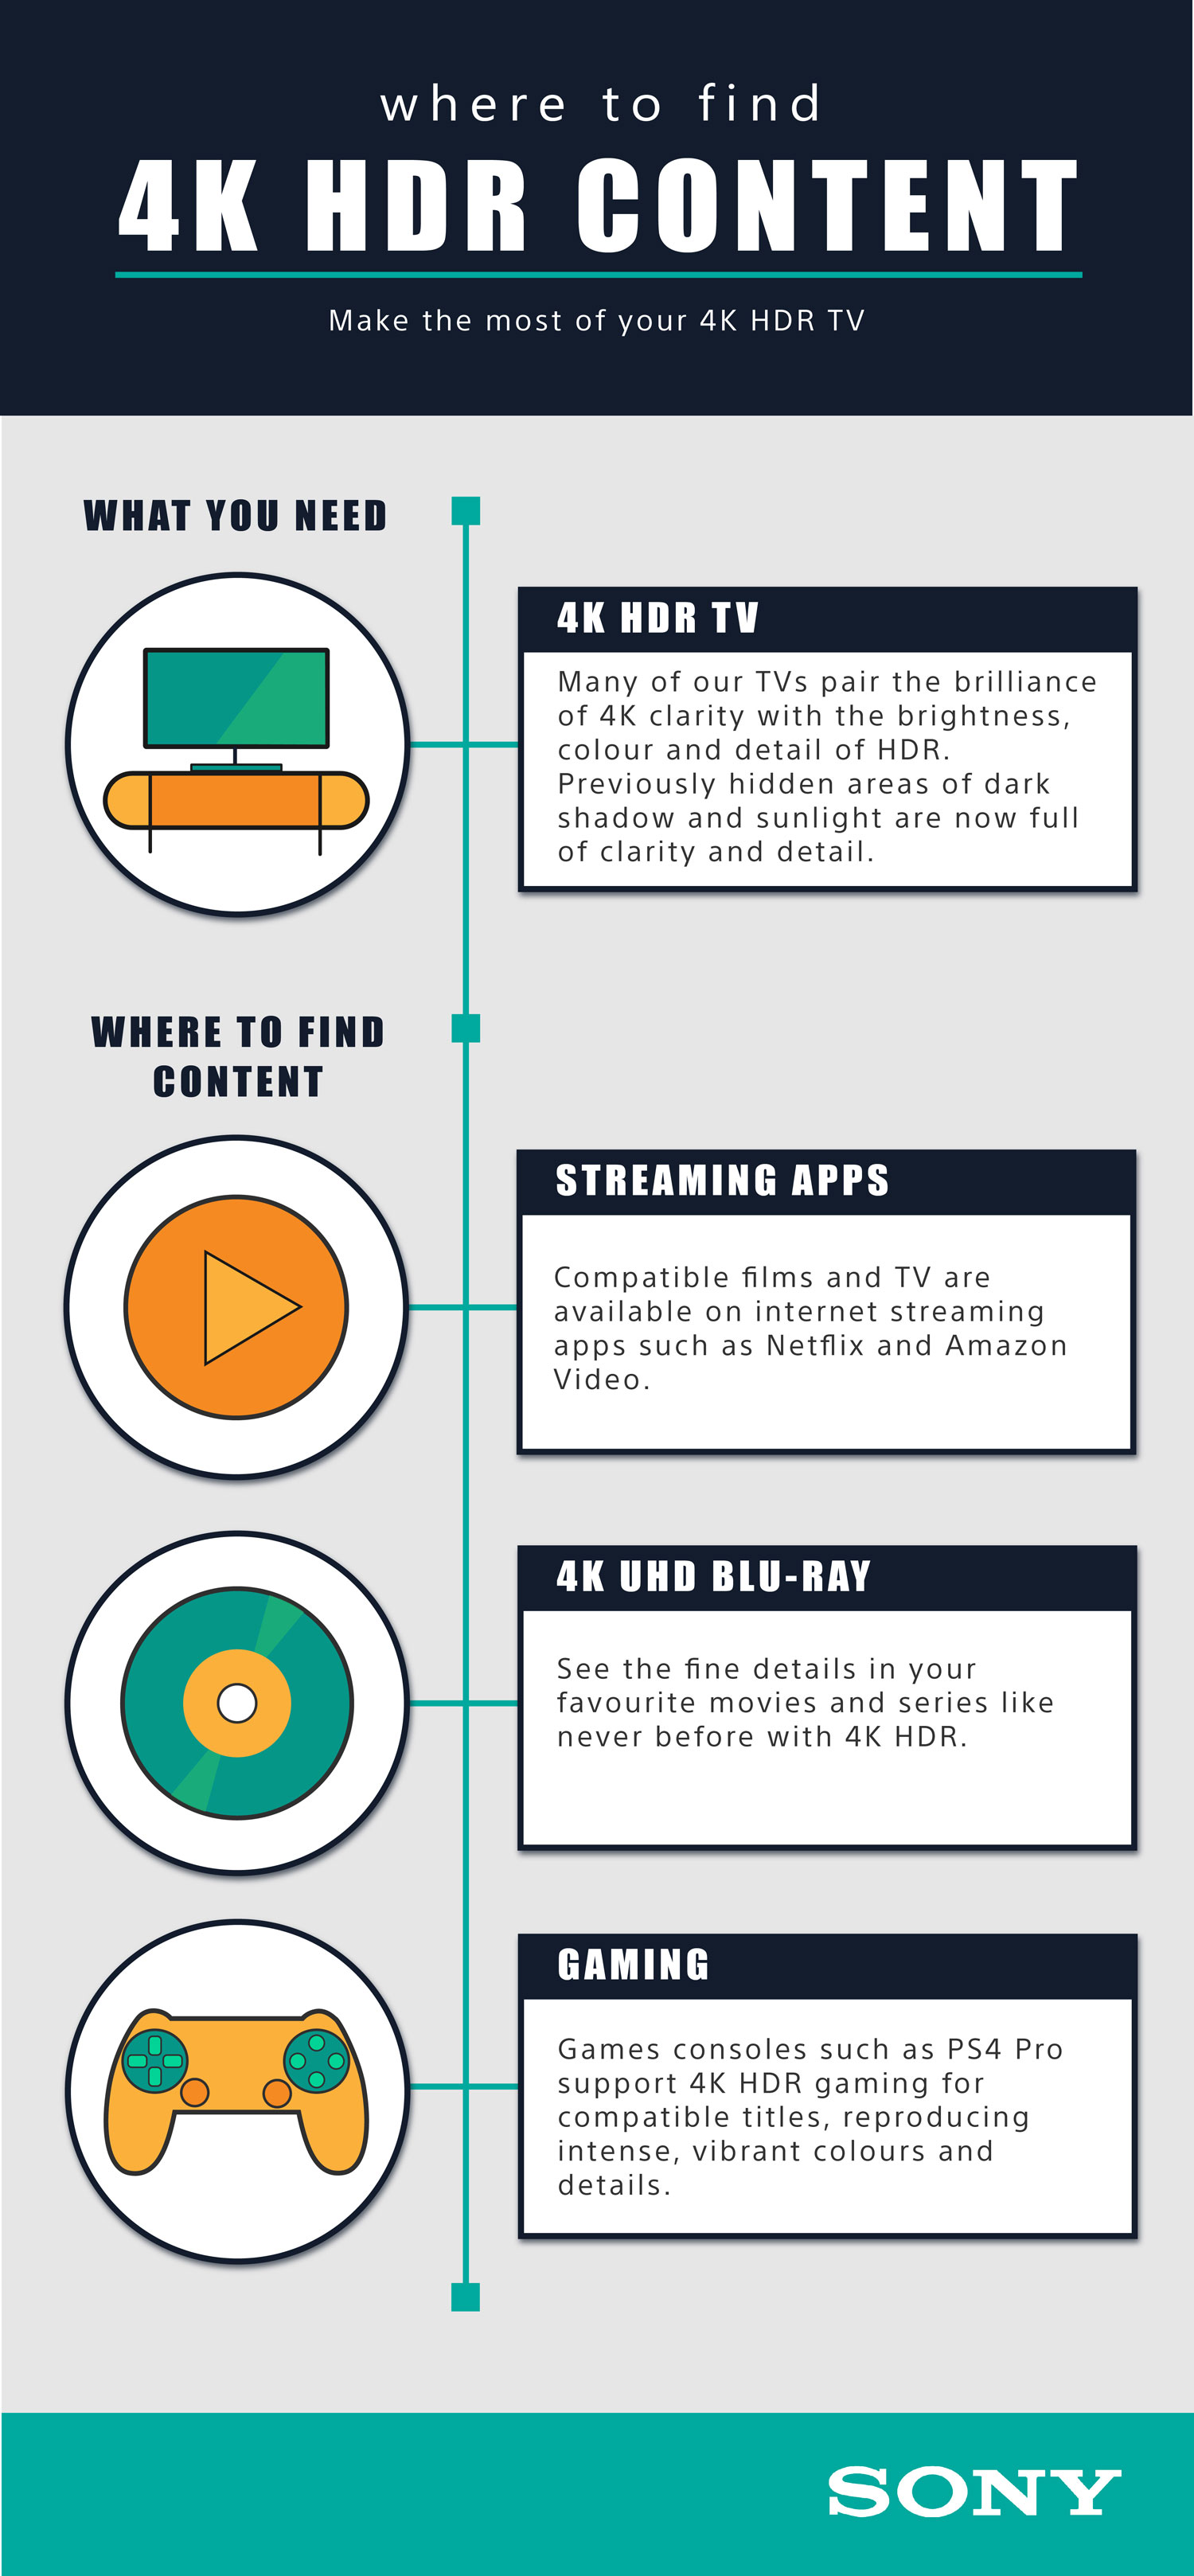 Where-to-Find-4K-HDR-Content-Infographic-ENGLISH.jpg